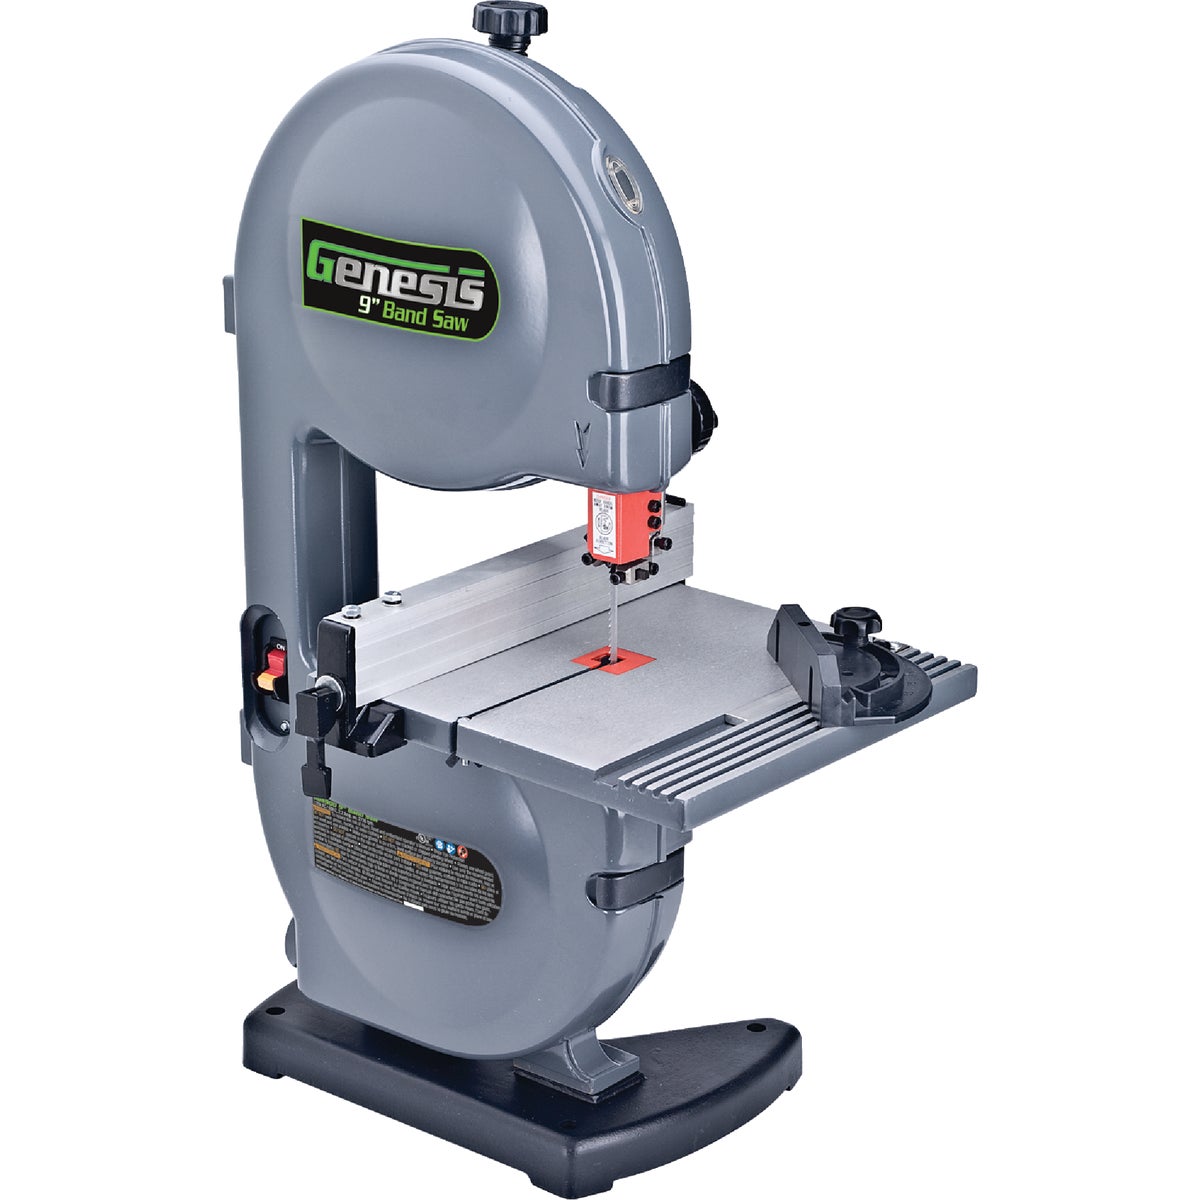 Item 390127, 9" band saw featuring 2.